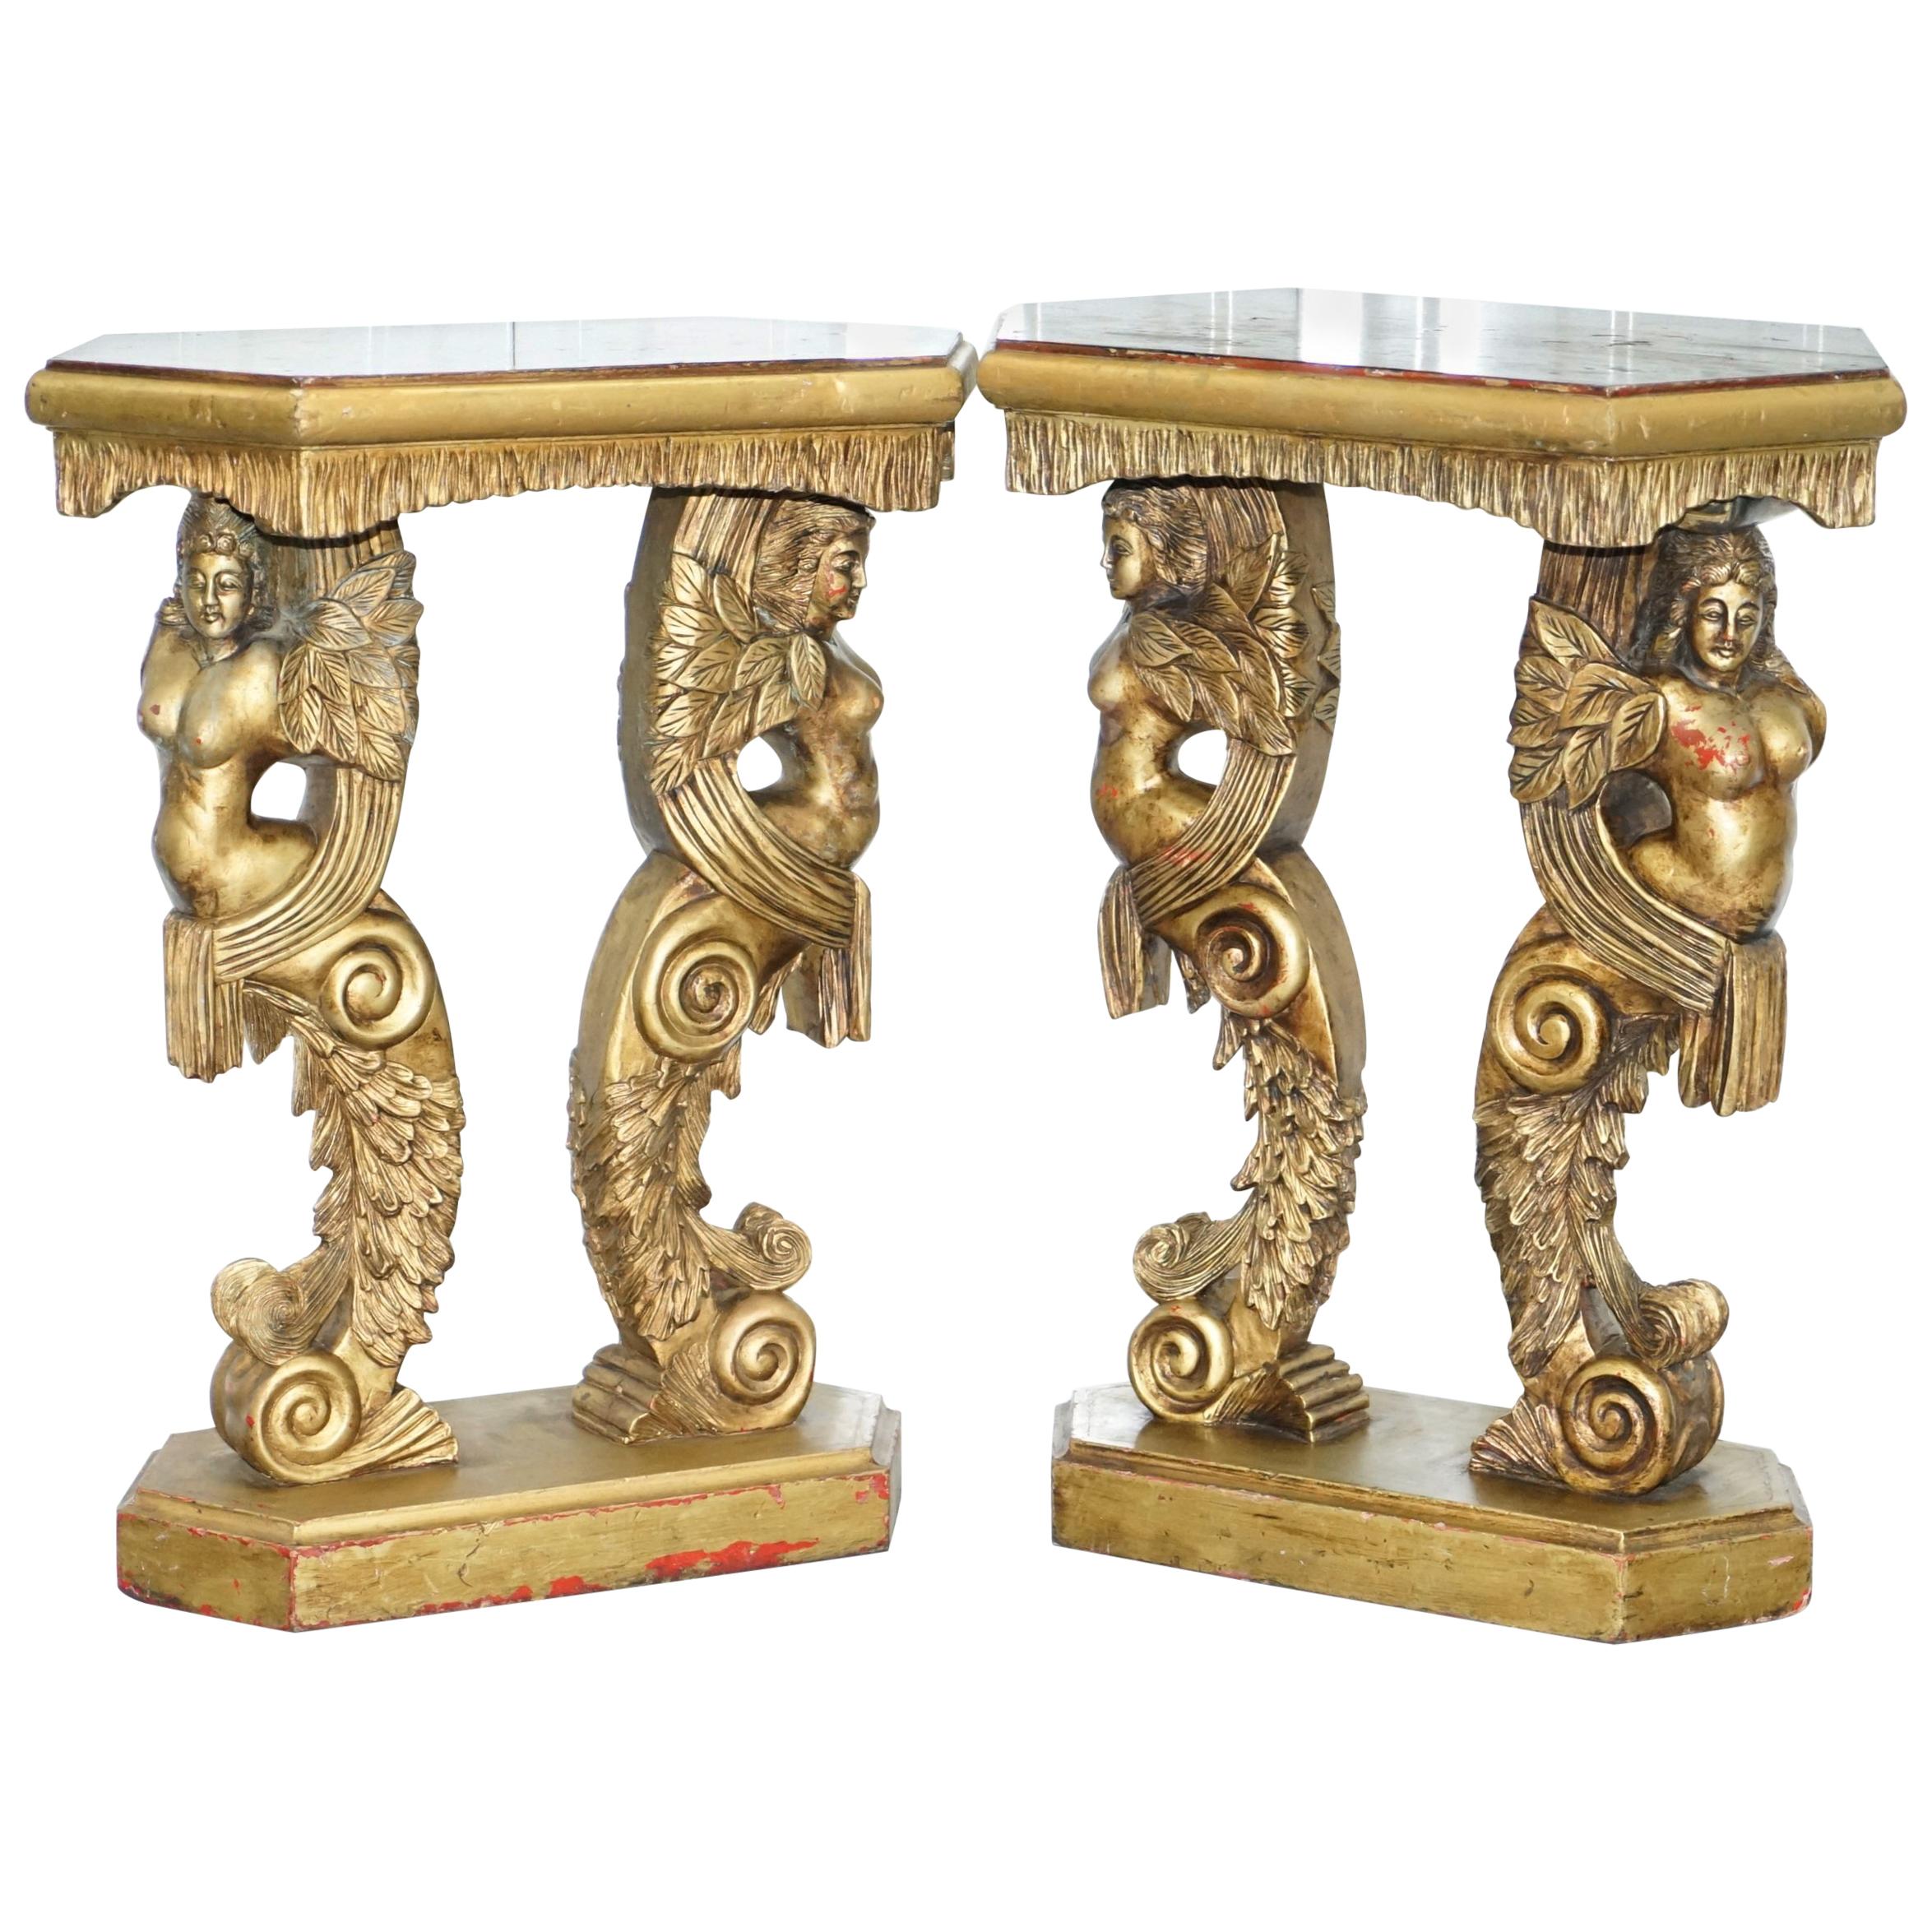 Pair of Giltwood Side Tables or Torchiere Stands Depicting Semi Nude Goddesses